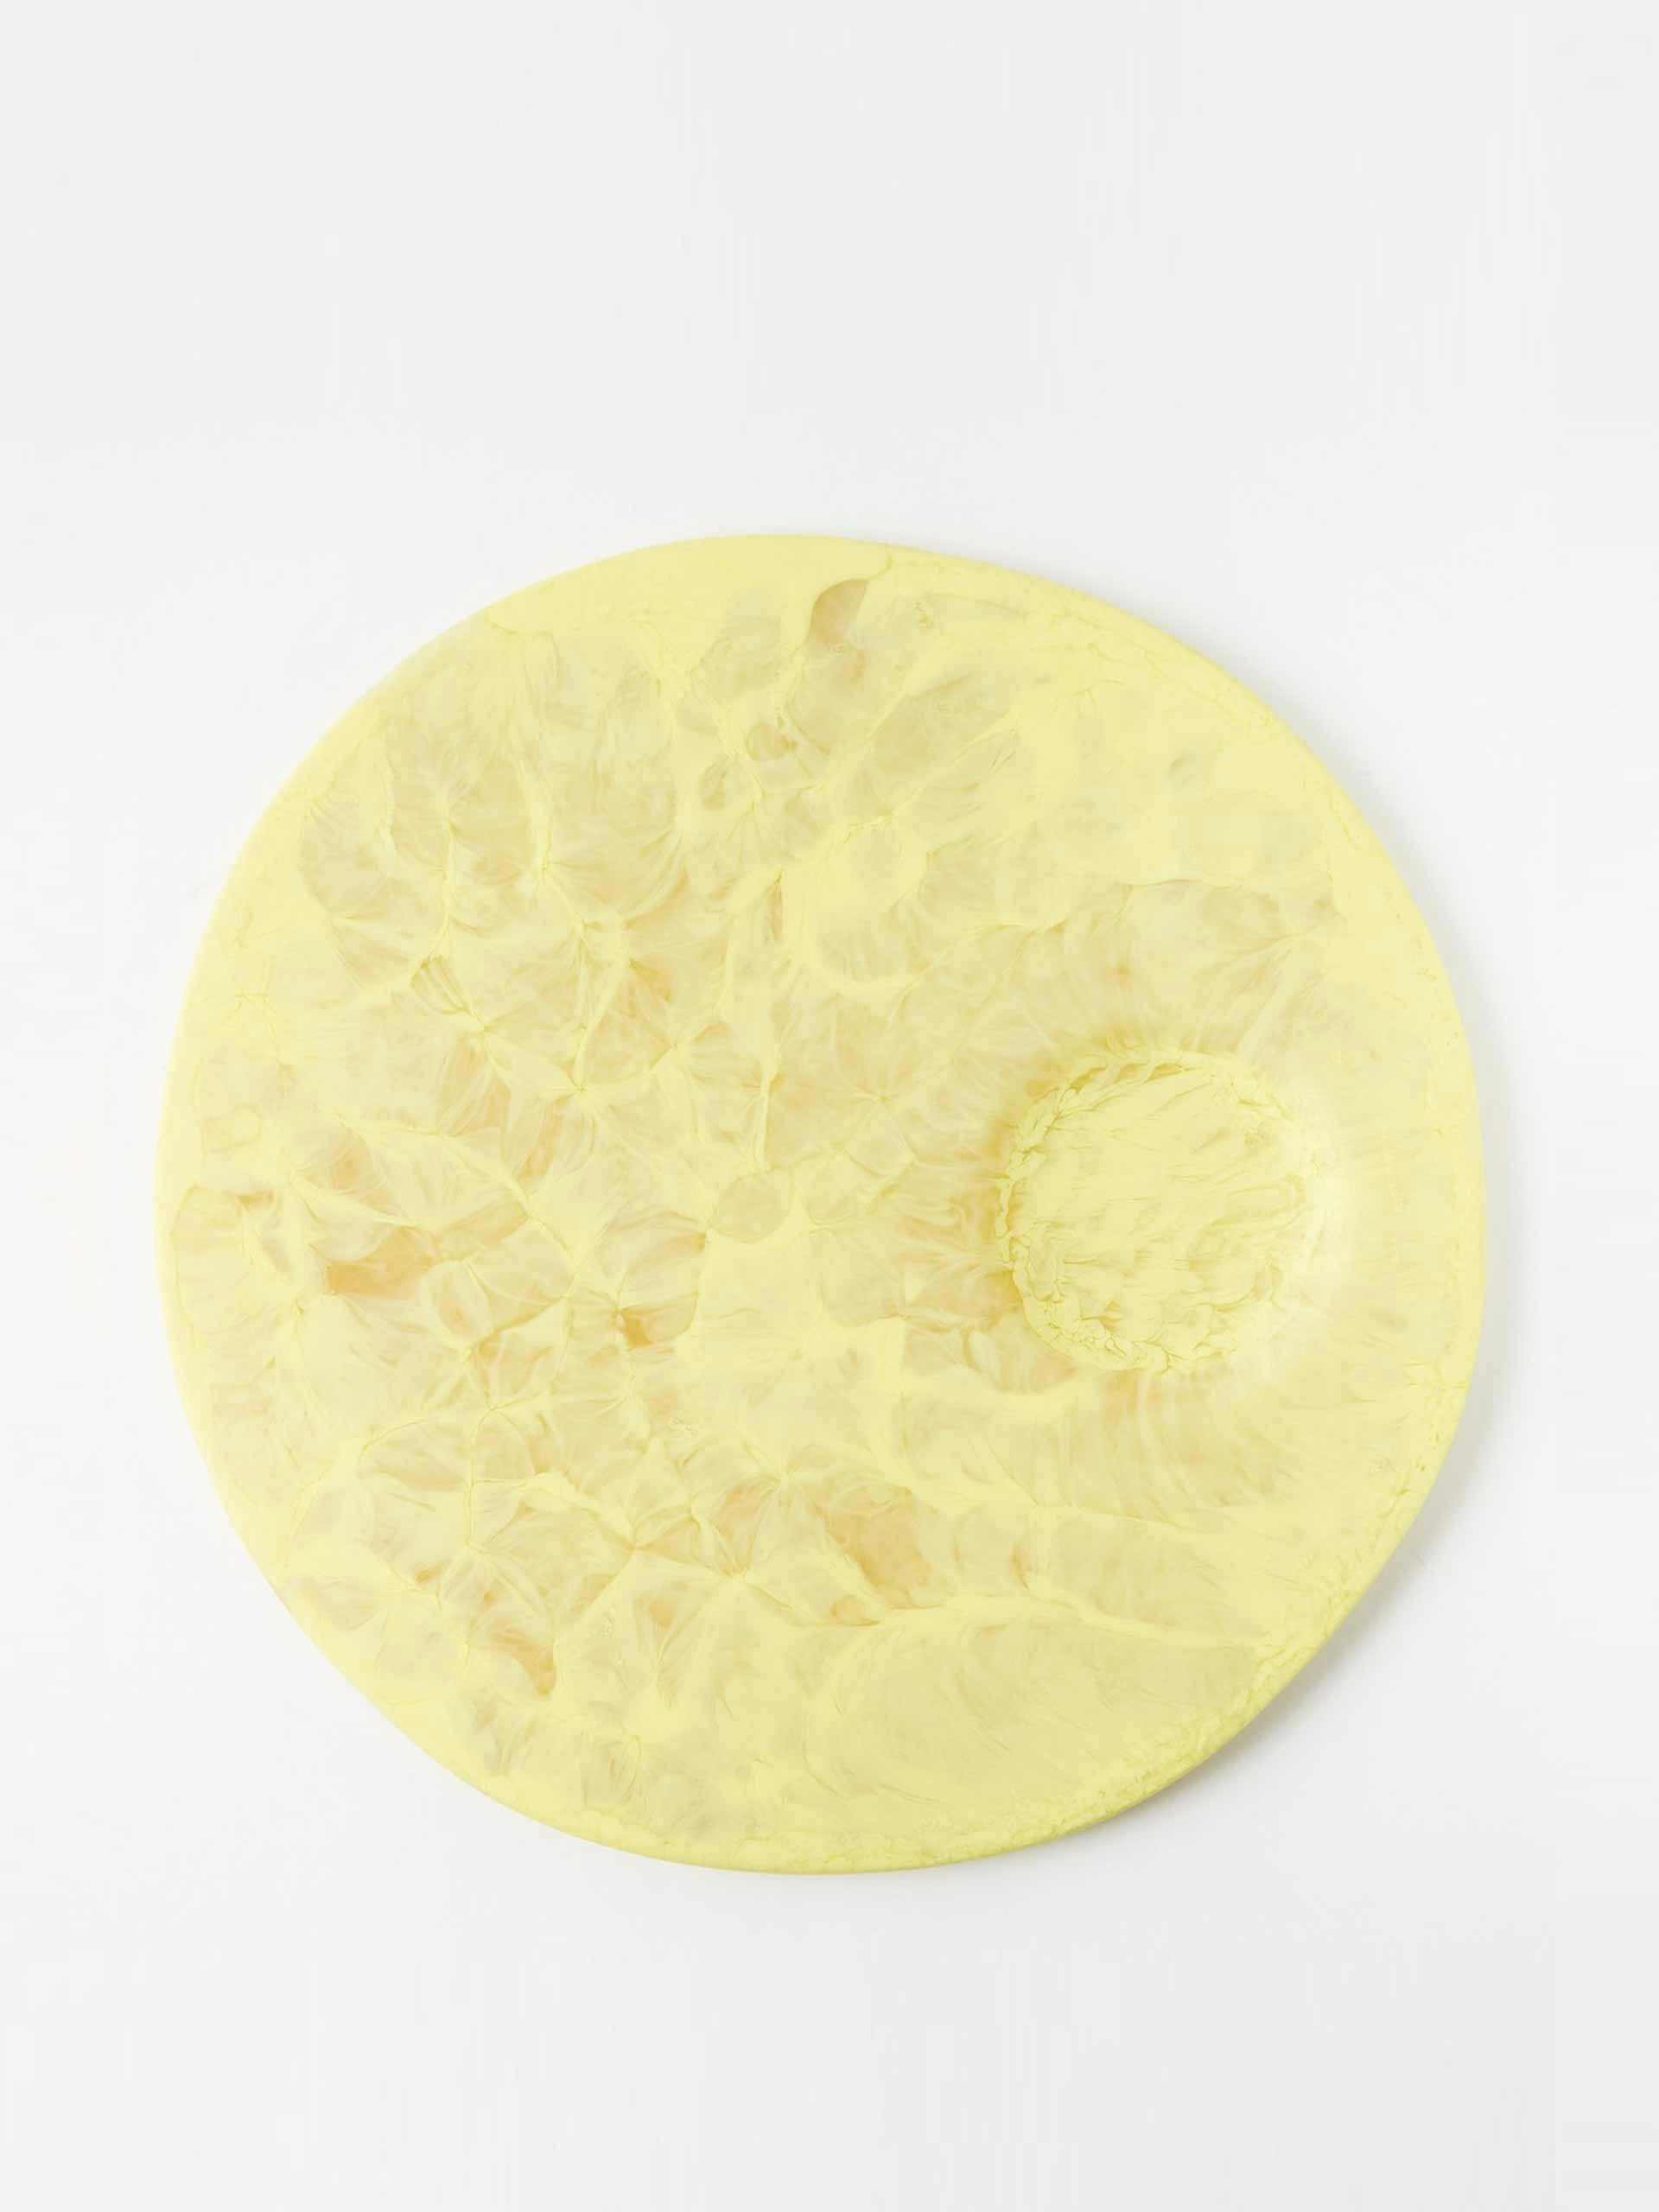 Marbled yellow serving platter